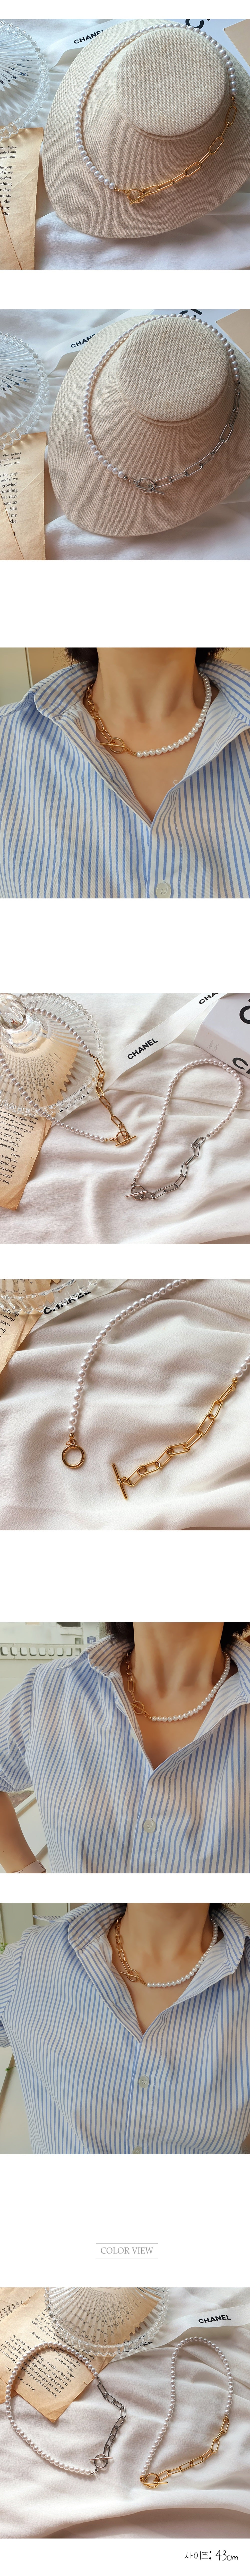 Pearl & Multi Chain Necklace-Holiholic